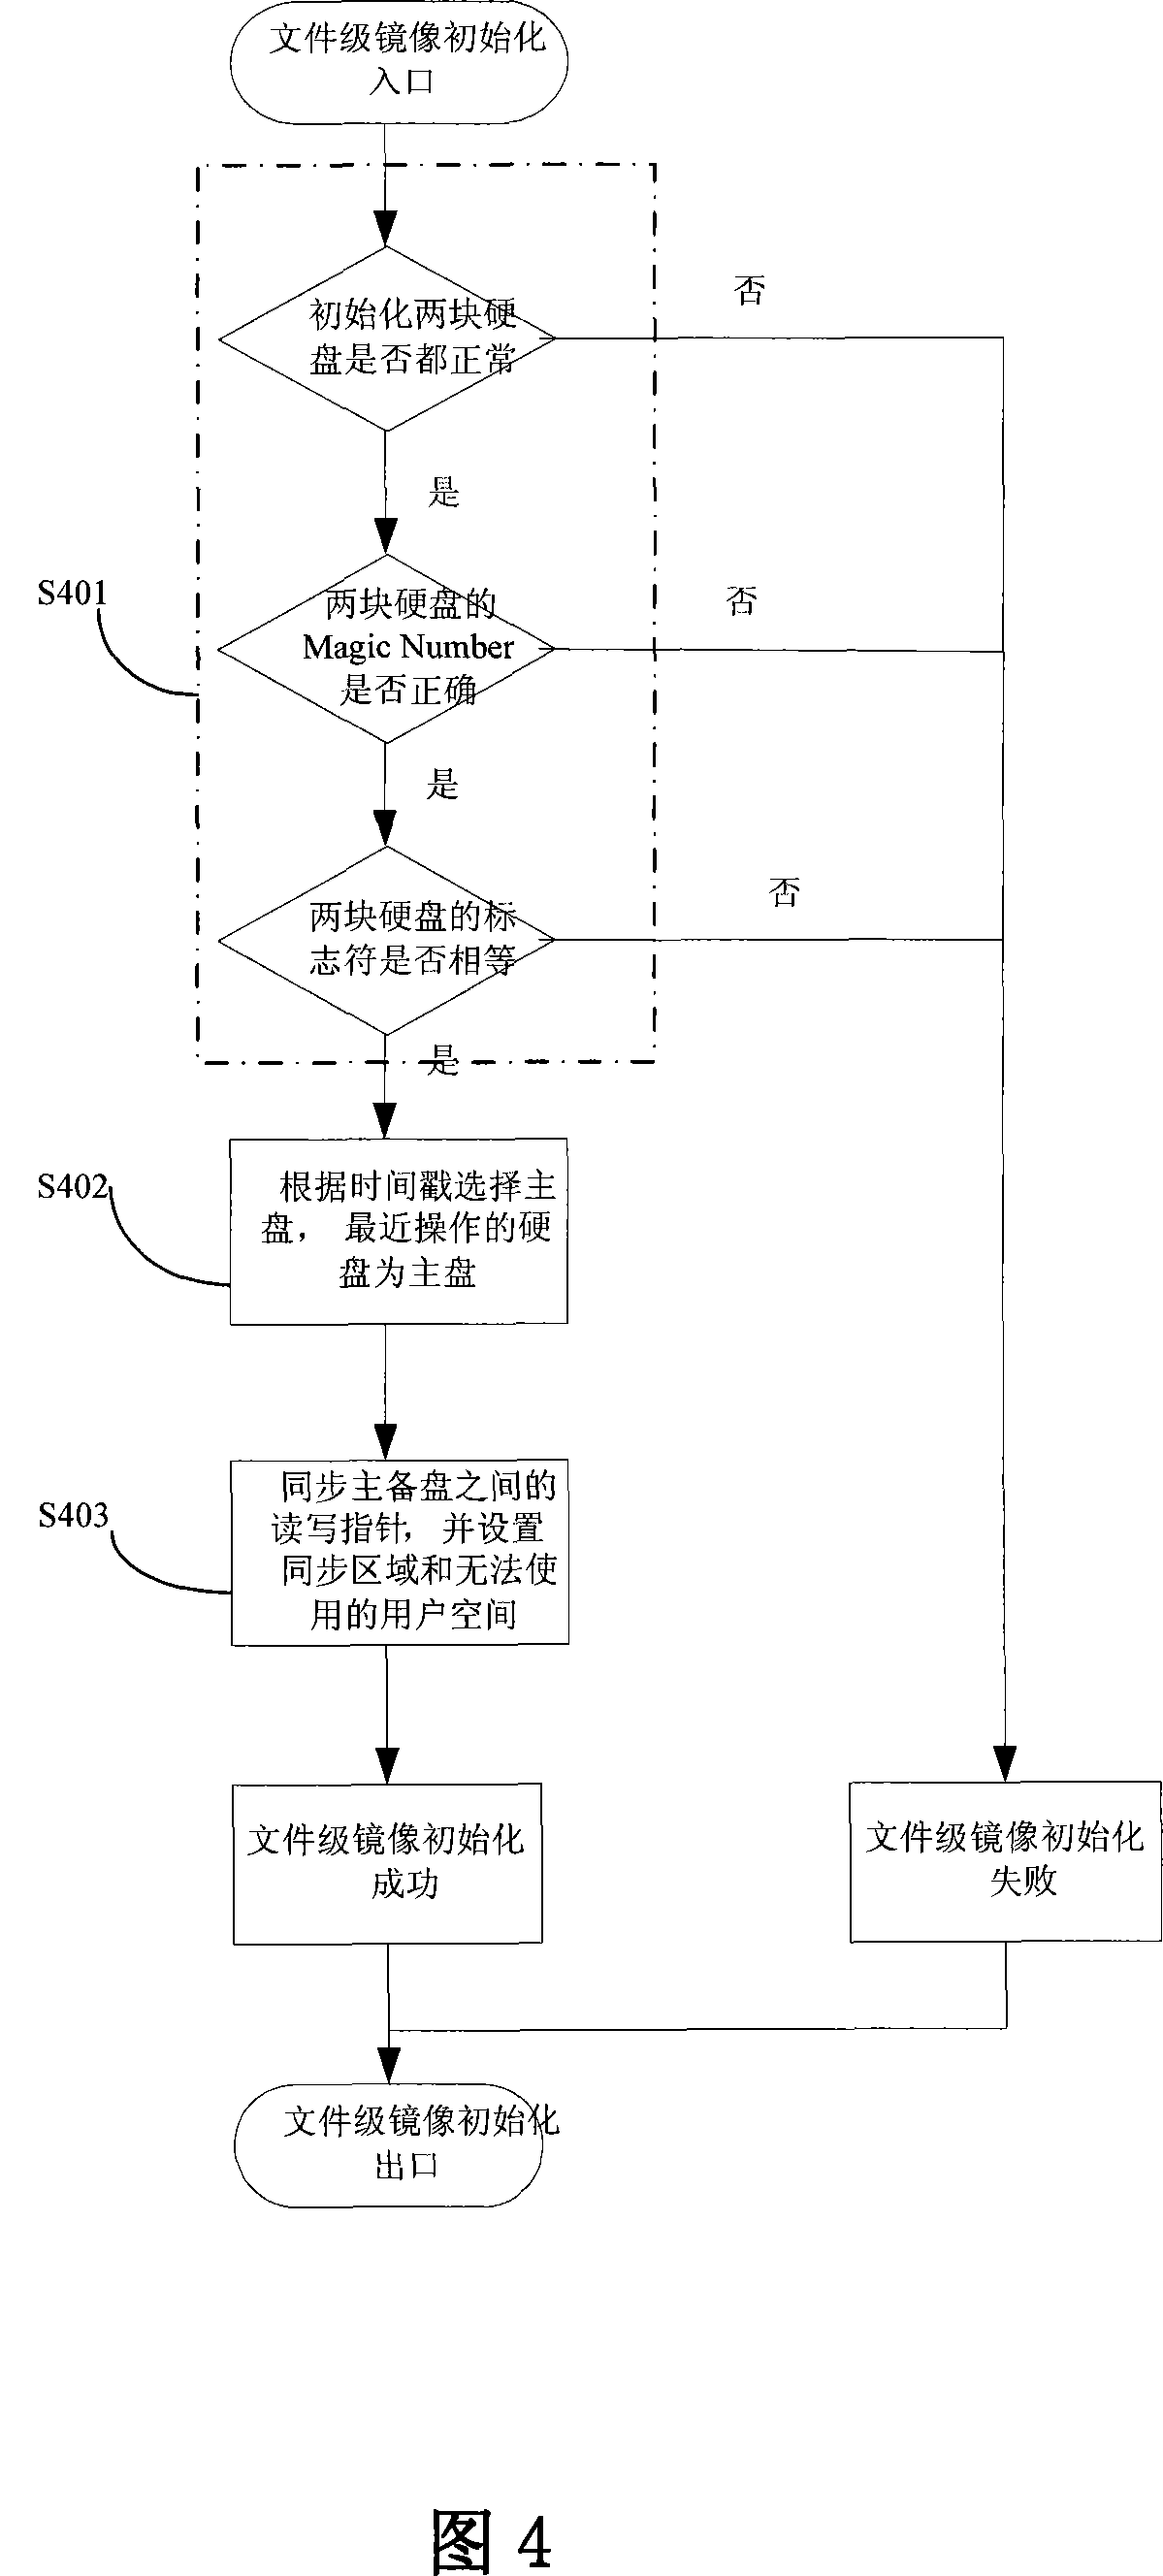 Method for implementing file class mirror-image under multiple hard disk based on nude file system